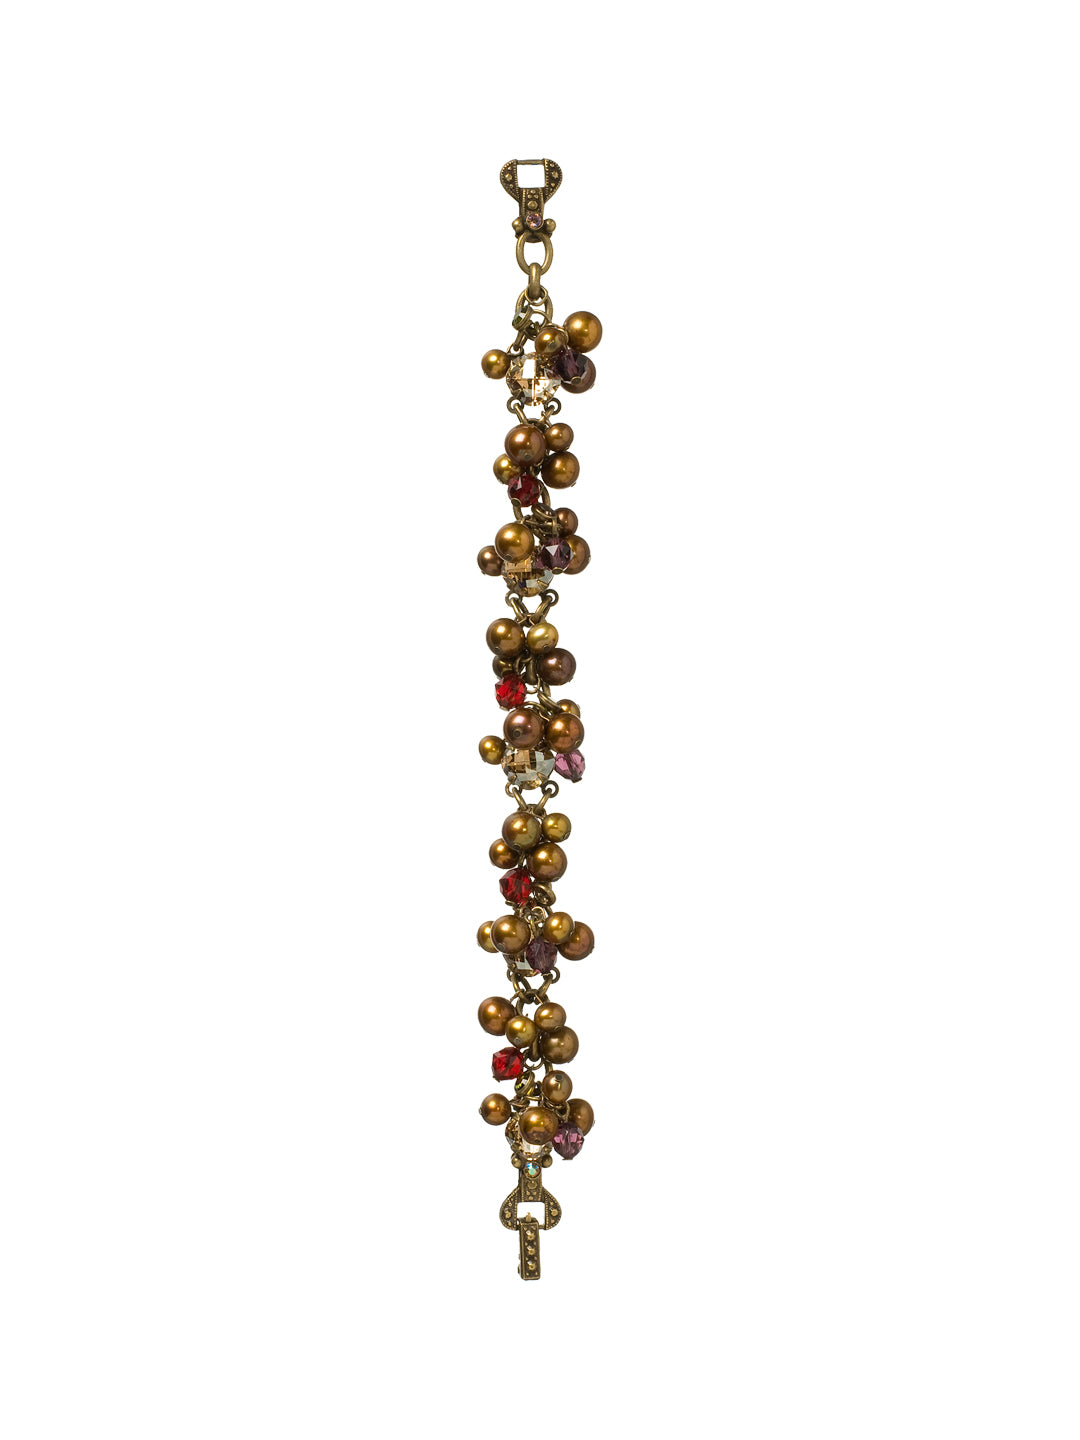 Clustered Crystal and Pearl Bracelet Tennis Bracelet - BCJ13AGTAP - A menagerie of impeccable beauty. Sparkling with impeccable beauty, simulated pearls and crystal beads are set on a loose chain link, punctuated by cushion cut stones. A foldover clasp makes this piece secure and stylish. From Sorrelli's Tapestry collection in our Antique Gold-tone finish.